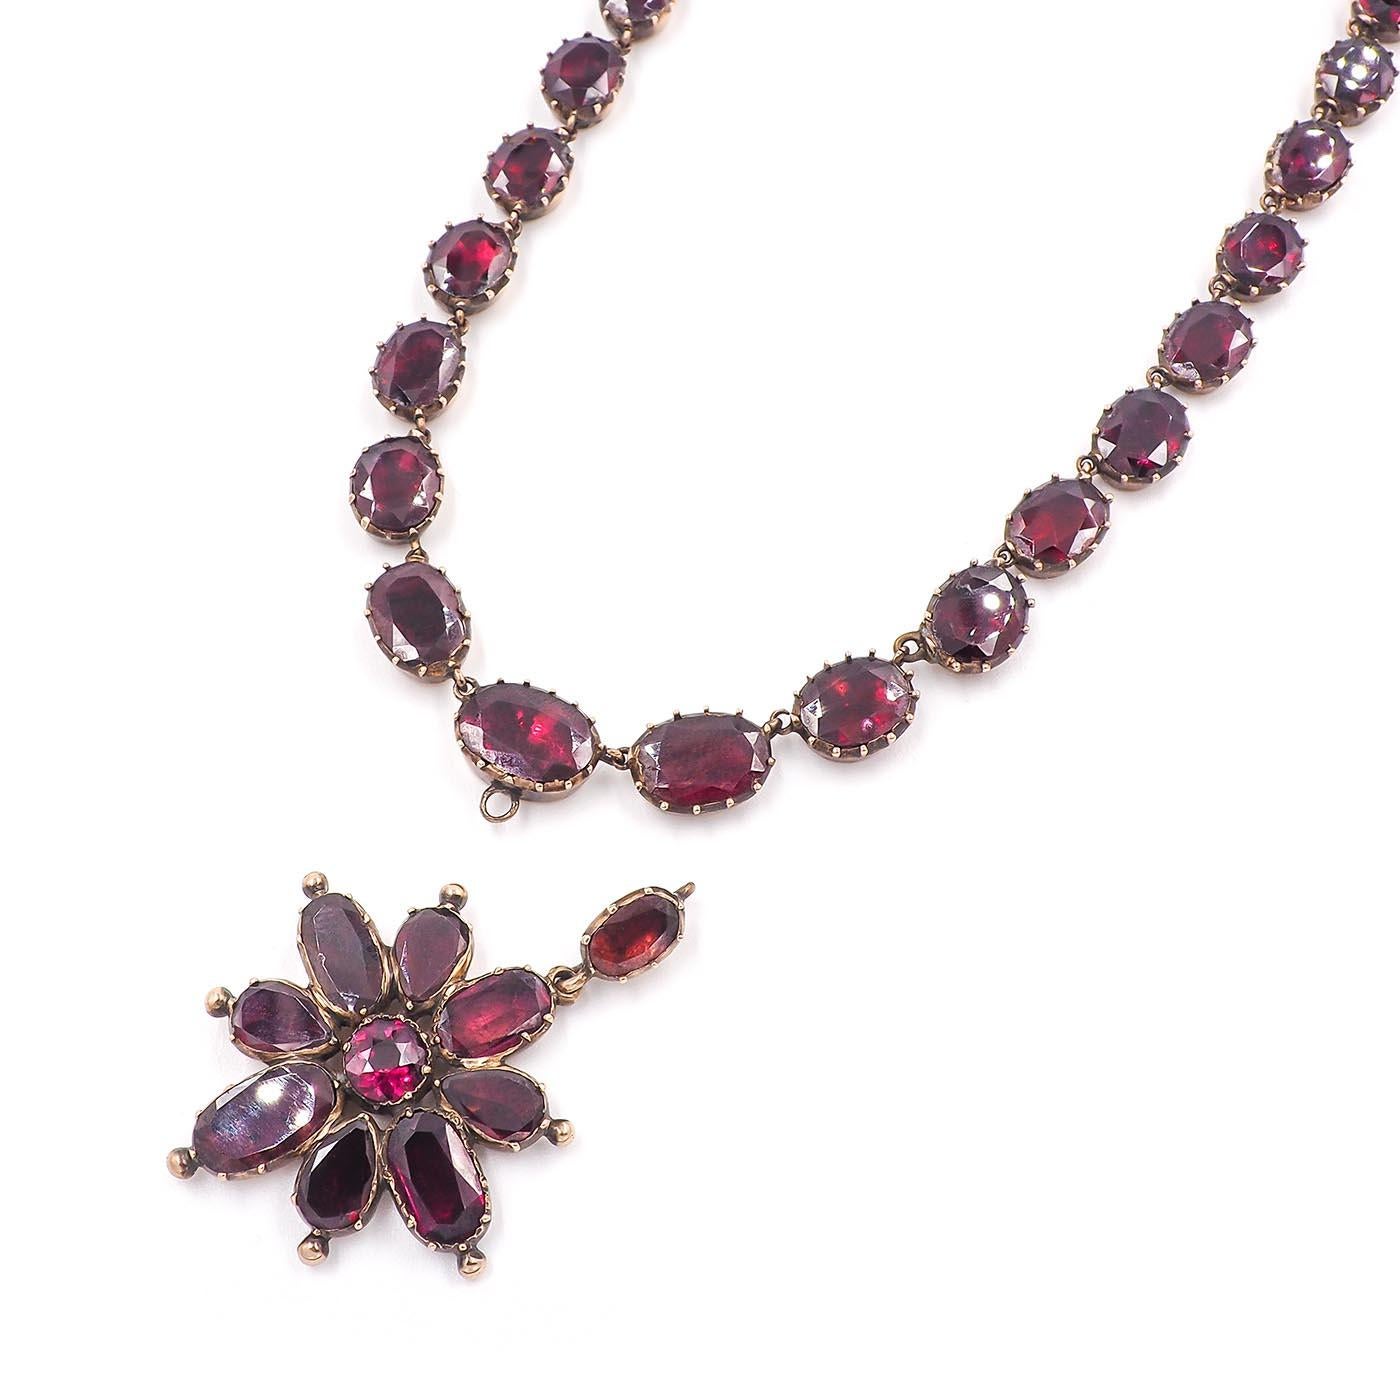 Original Georgian era Garnet Rivière Pendant Necklace composed of 10k yellow gold. With oval-shaped flat cut natural red garnets, foil-backed in collet settings. Necklace measures approximately 15.75